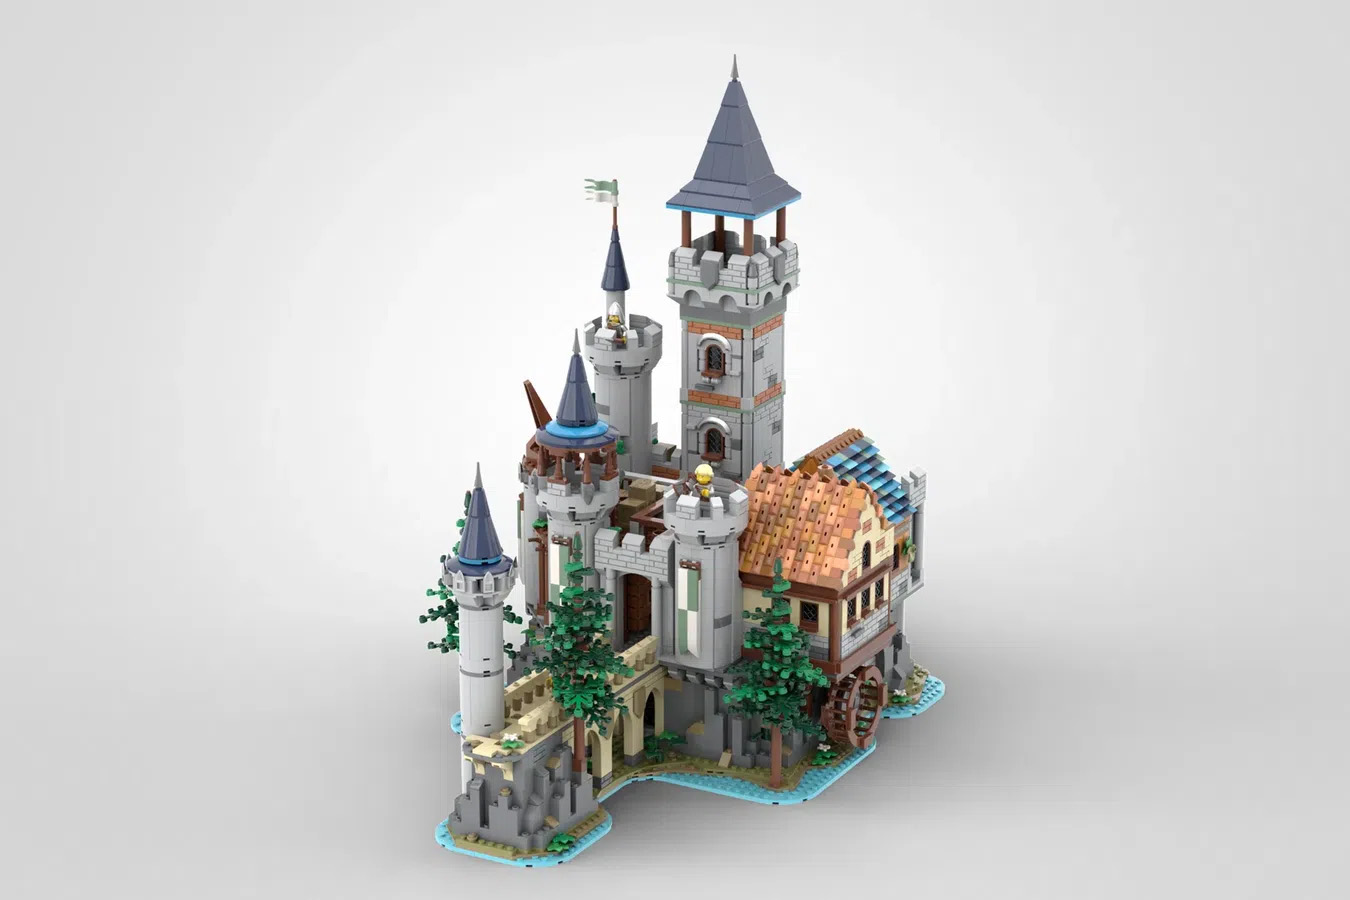 THE MEDIEVAL FORTRESS Achieves 10K Support on LEGO IDEAS